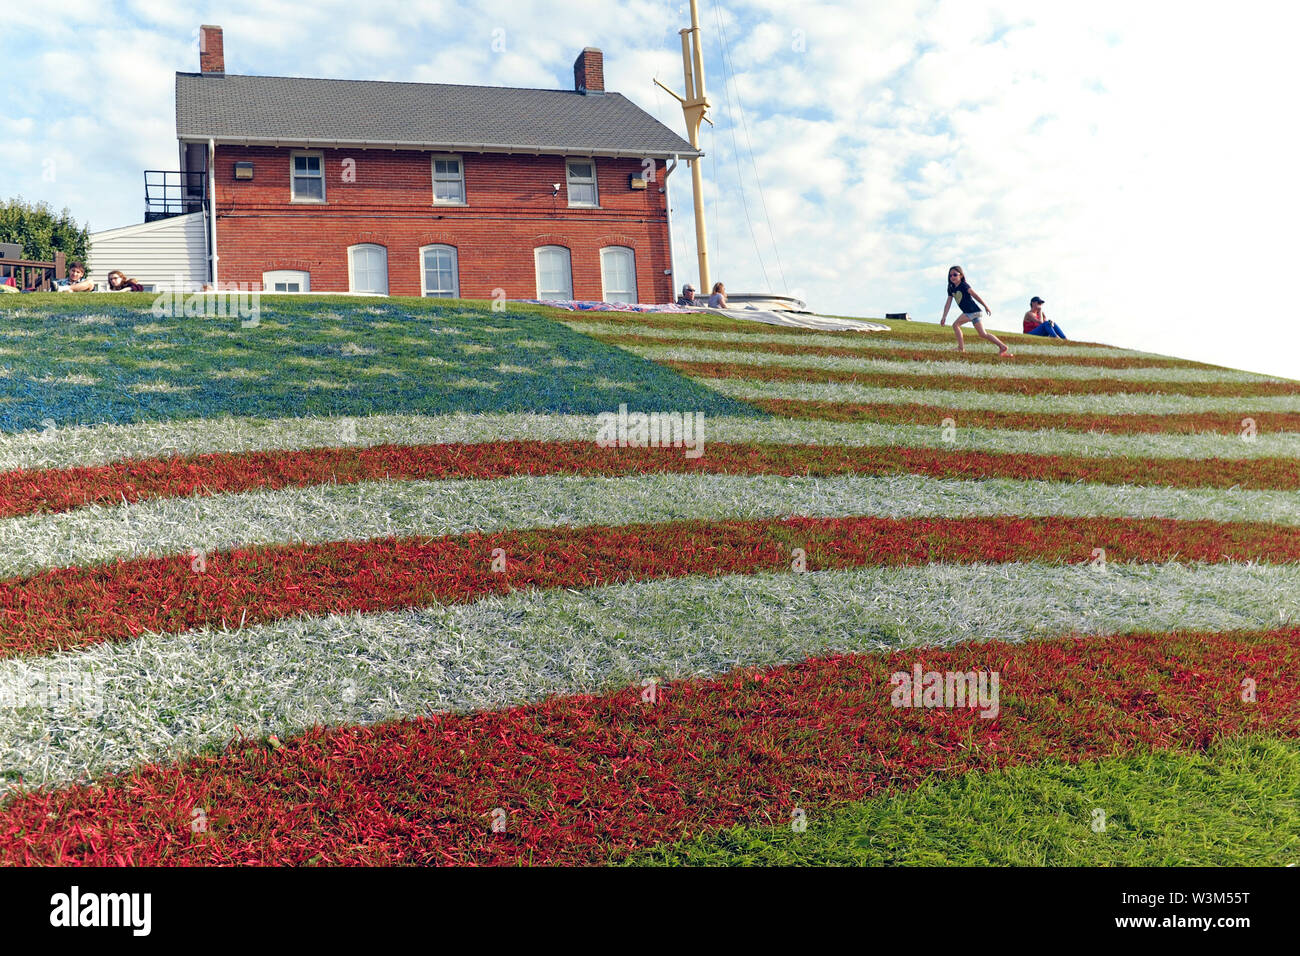 A giant US flag painted in the grass on a hillside in Fairport Harbor, Ohio, USA during the July 4, 2019 holiday celebrations. Stock Photo